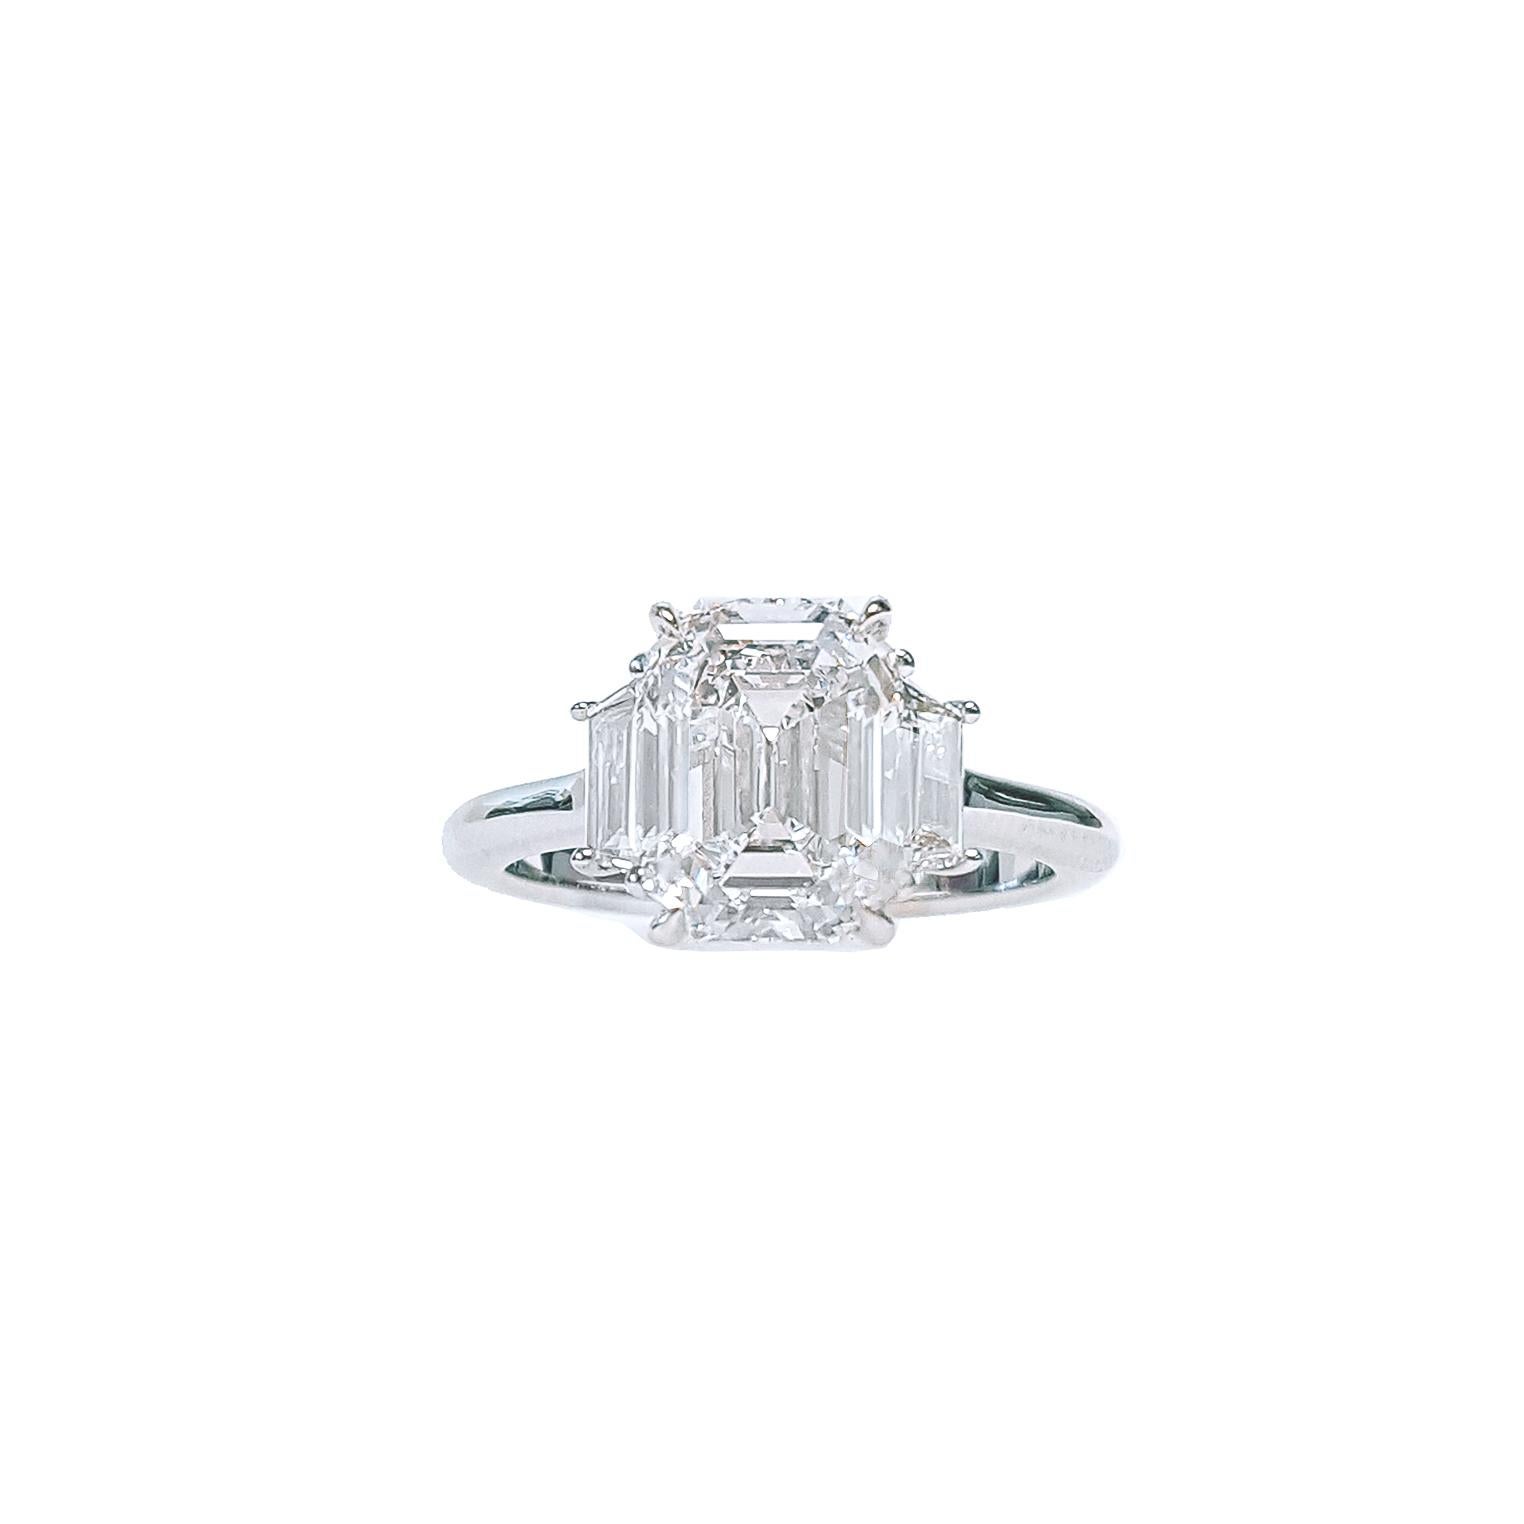 Contemporary 3 Carat, D Color Emerald-Cut Diamond Three-Stone Engagement Ring, GIA Certified. For Sale